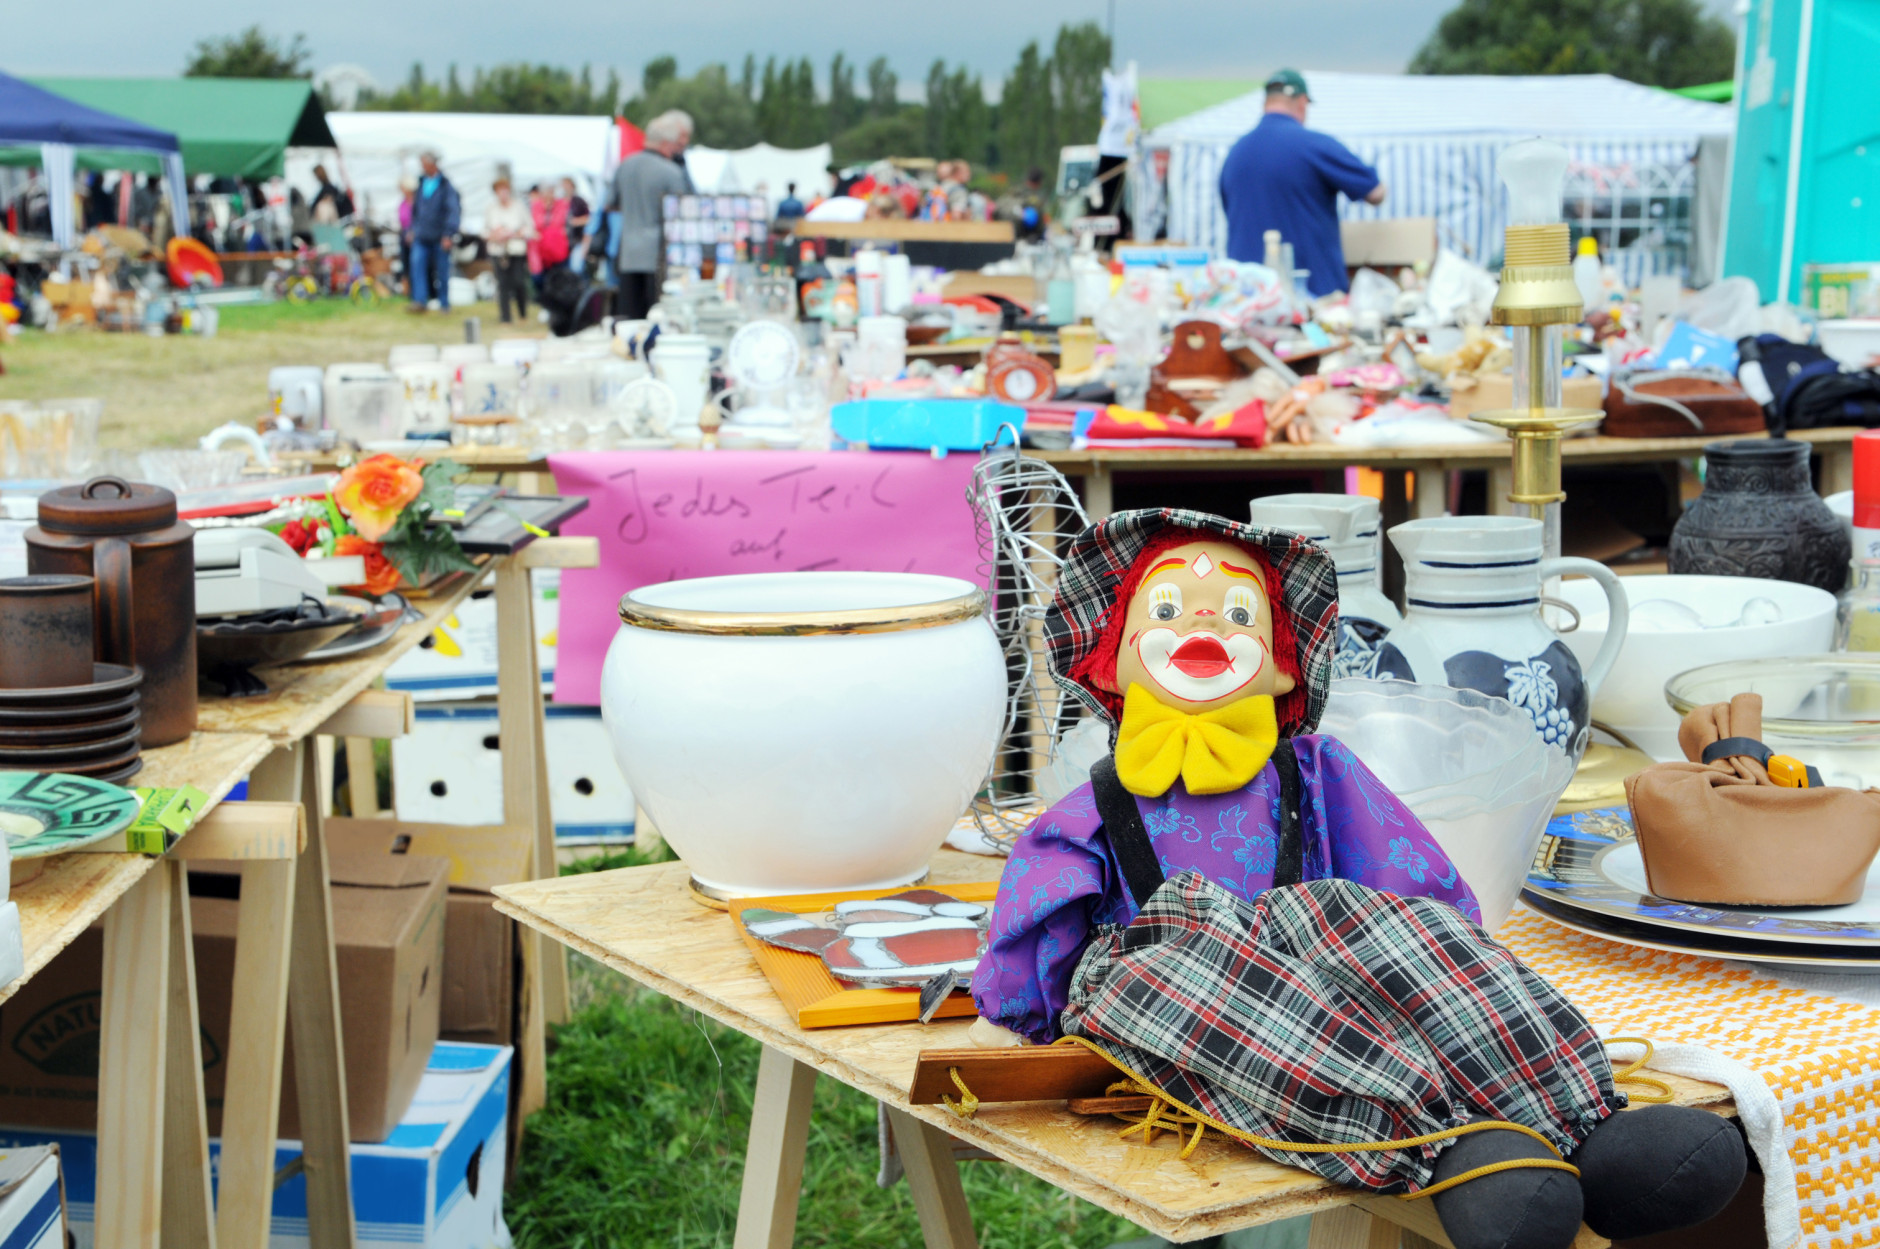 It's a typical impression of Flea Market at Havelberg (Saxony-Anhalt, Germany), that takes place every year around the first September Weekend. In front tables with colorful clown marionette for puppet show and dishware. in background group of visitors taking a look on products. dark clouds on shy. in background German words "jedes Teil nur"... its English every item just...